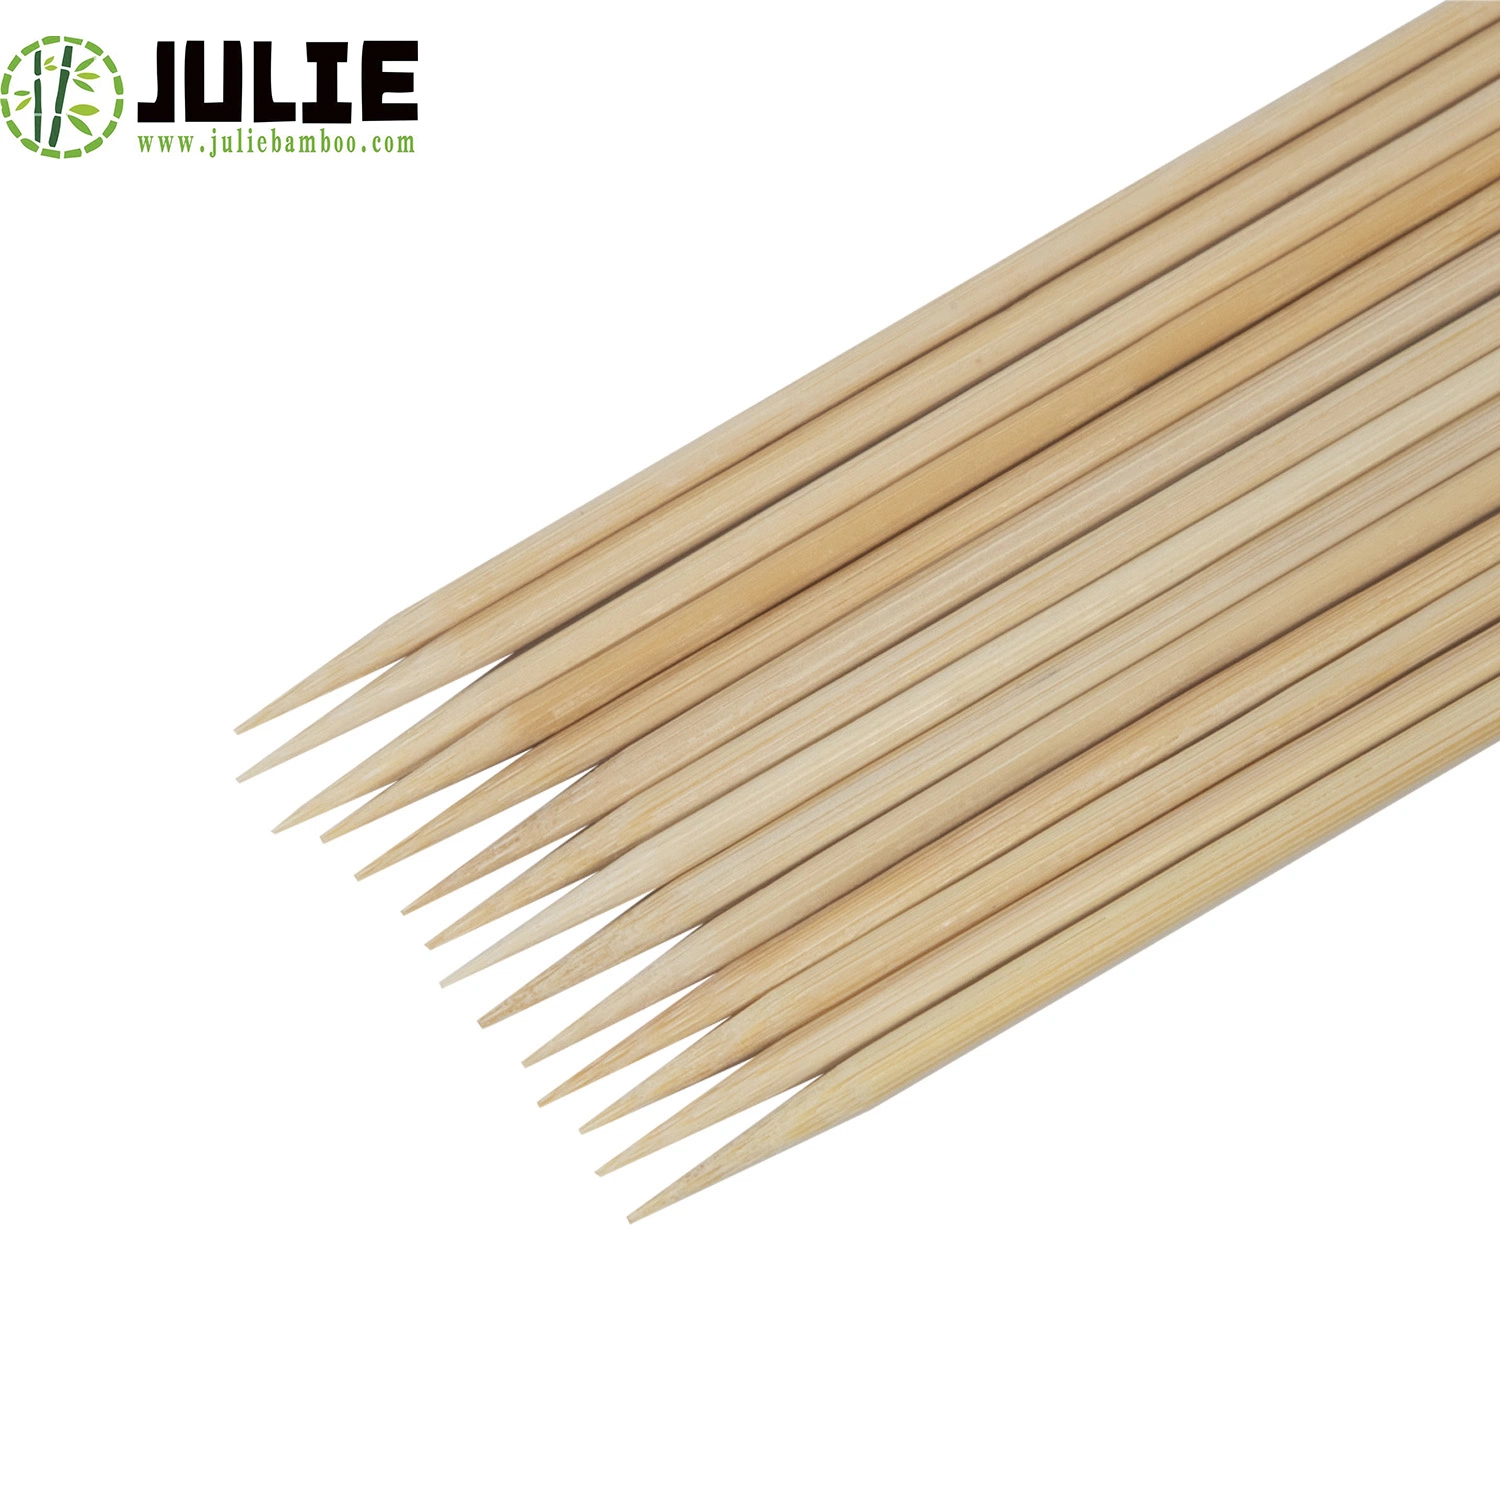 Food-Contact Grade High Quality Eco-Friendly Biodegradable Disposable Natural Bamboo Skewers Bamboo Stick BBQ Skewers